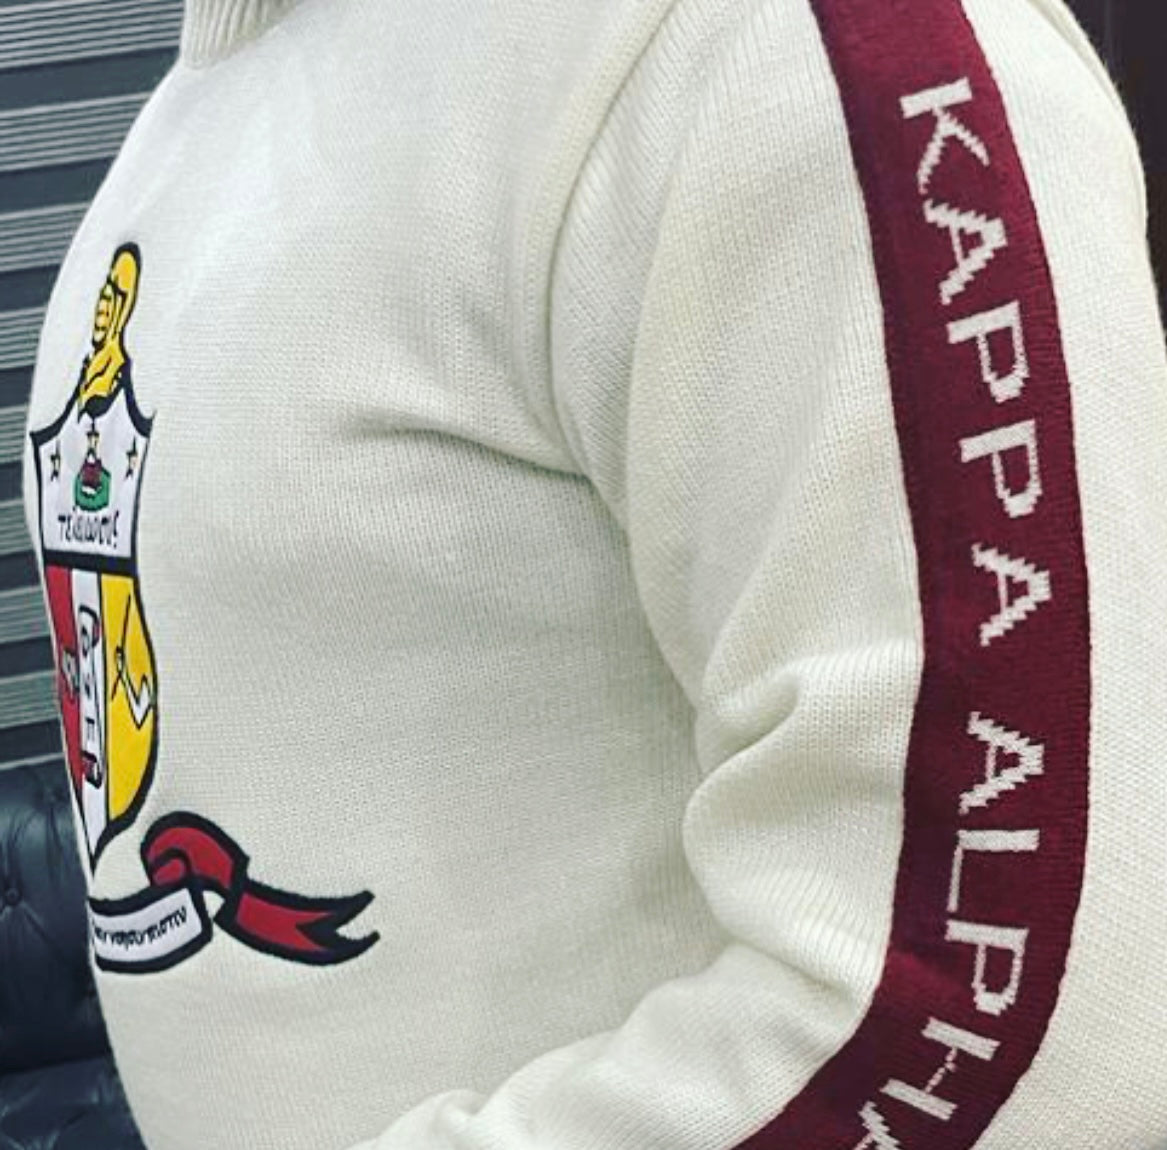 Exclusive Kappa Alpha Psi Double Stitched Appliqué Embroidery Crimson Sweater. This is the perfect long-sleeved Sweater to wear while showing off your Kappa Alpha Psi fraternity . A comfortable 100% Acrylic with a twill embroidery across the chest give you the perfect fit. This sweater is also a perfect gift for your favorite Kappa Man.